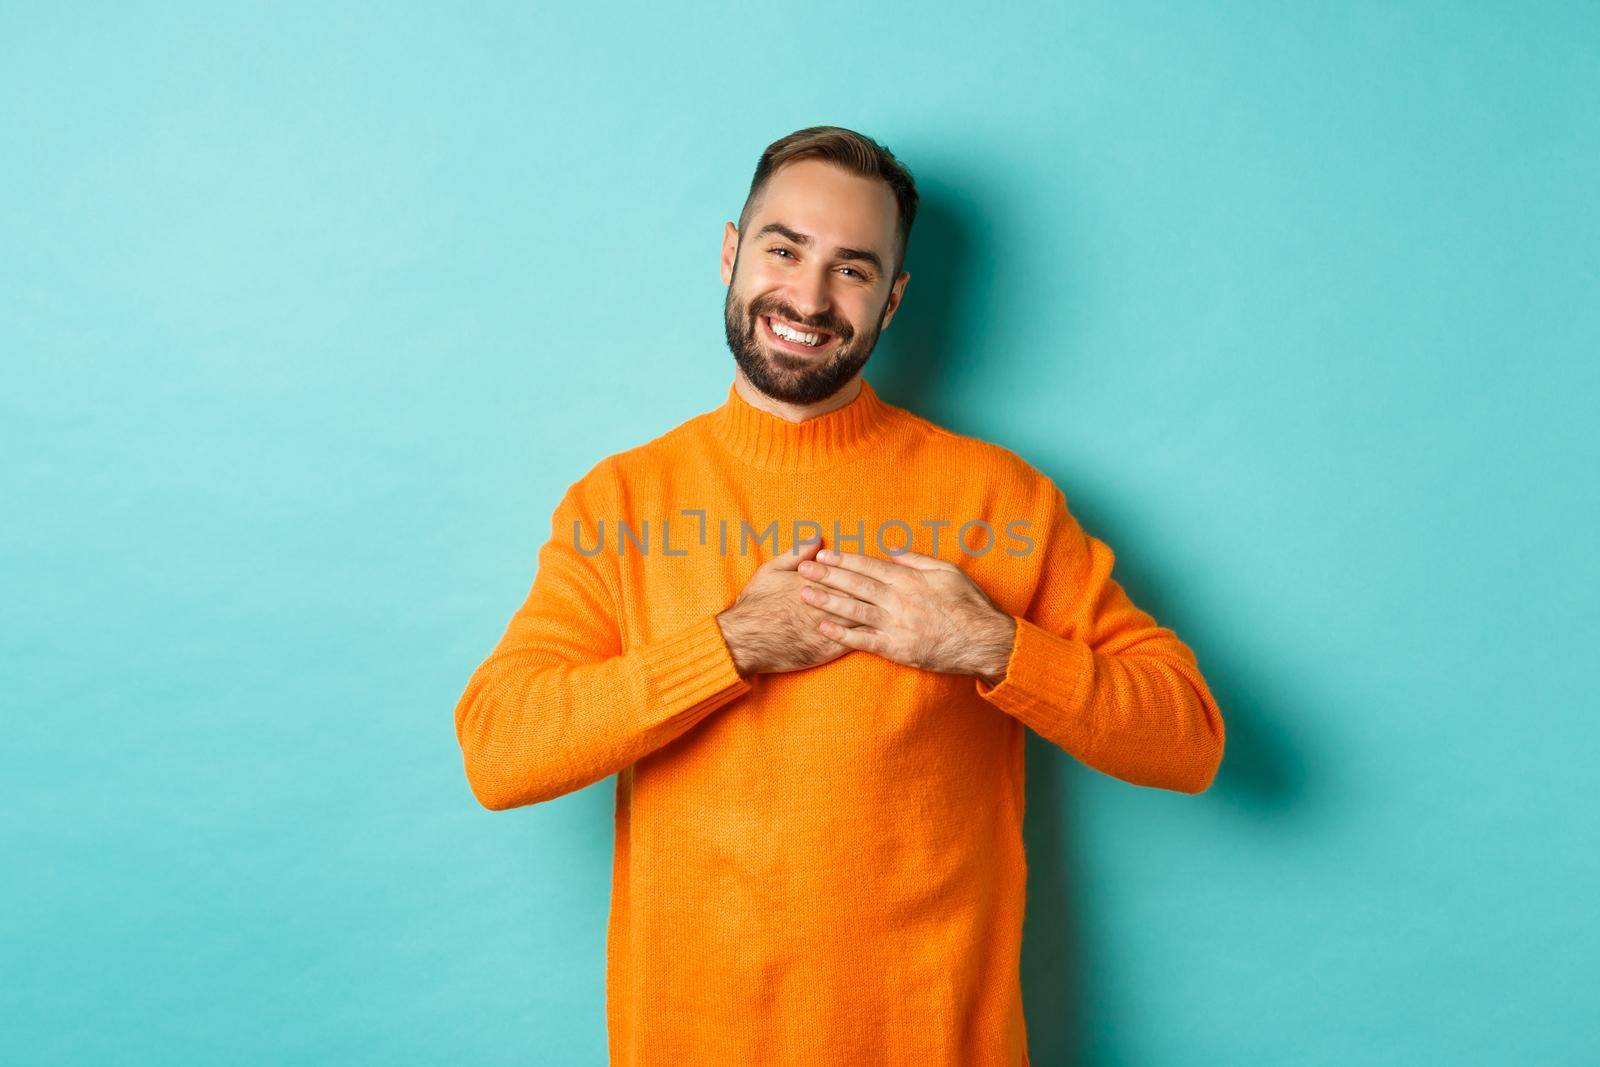 Grateful man smiling, holding hands on heart, thank you gesture, feeling touched with gift, standing over turquoise background.